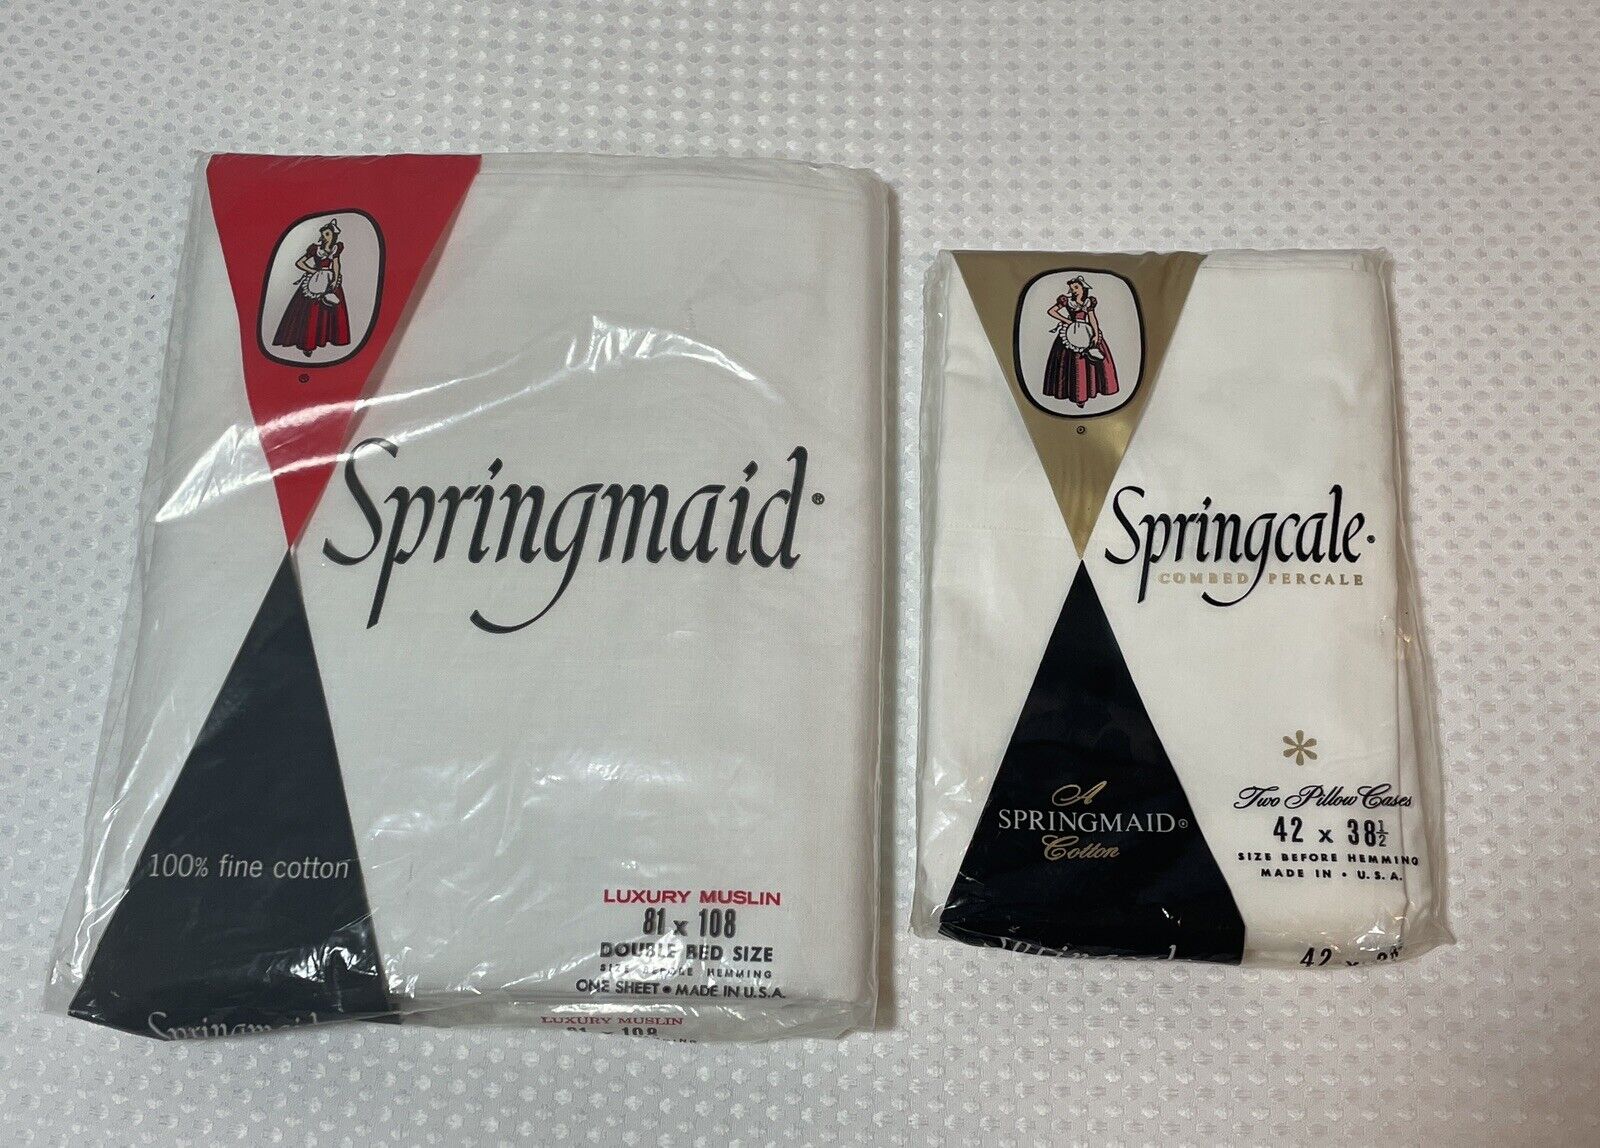 VTG Springmaid Flat Double Sheet 81” x 108” AND 2 Pillow Cases 42” x 38.5” *NOS*